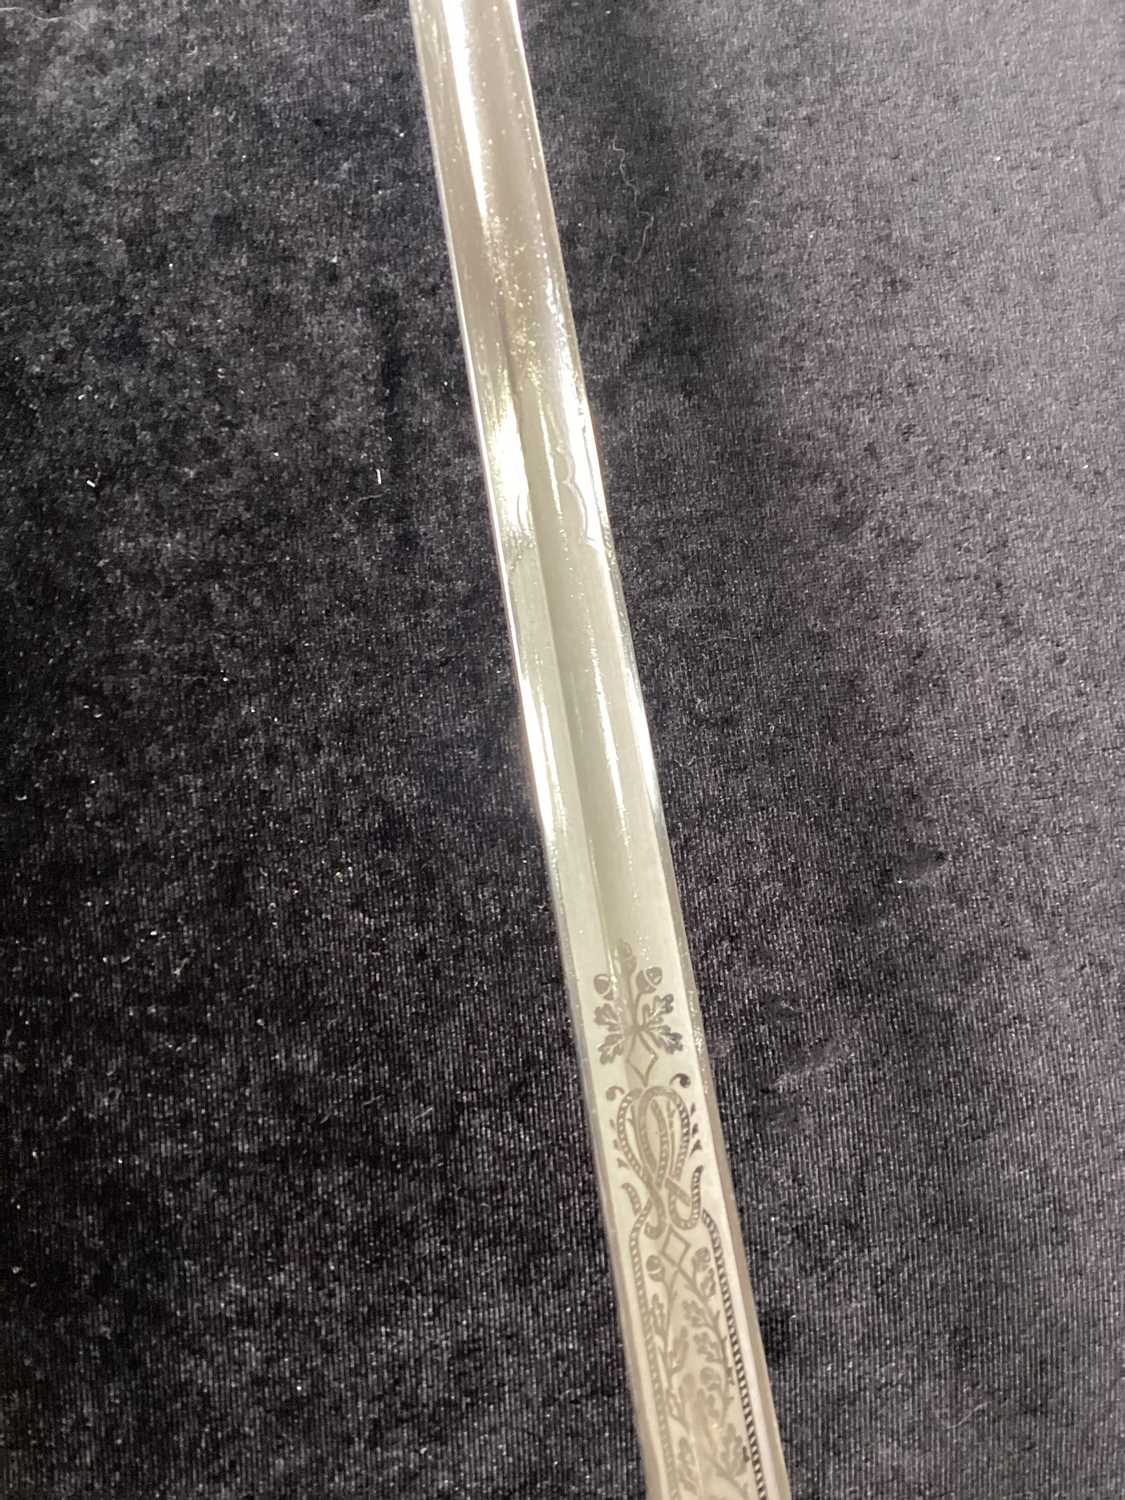 BRITISH ROYAL NAVAL OFFICER'S DRESS SWORD, BY GIEVES, EARLY TO MID-20TH CENTURY - Image 10 of 23